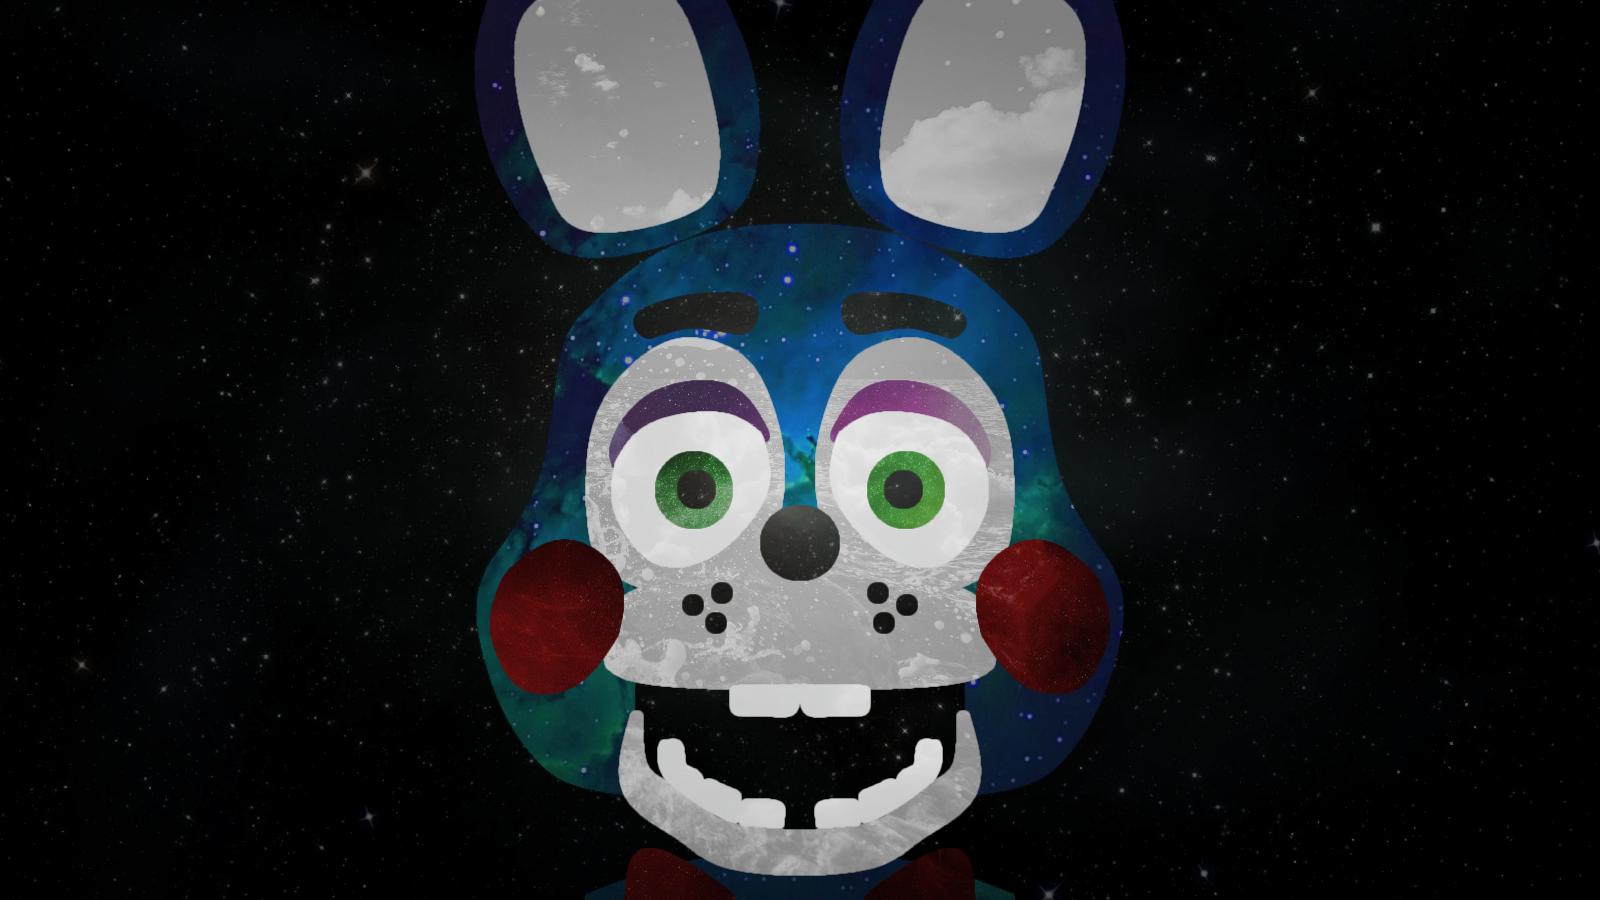 Galaxy Toy Bonnie Wallpaper! (1600x900) Suggest another animatronic